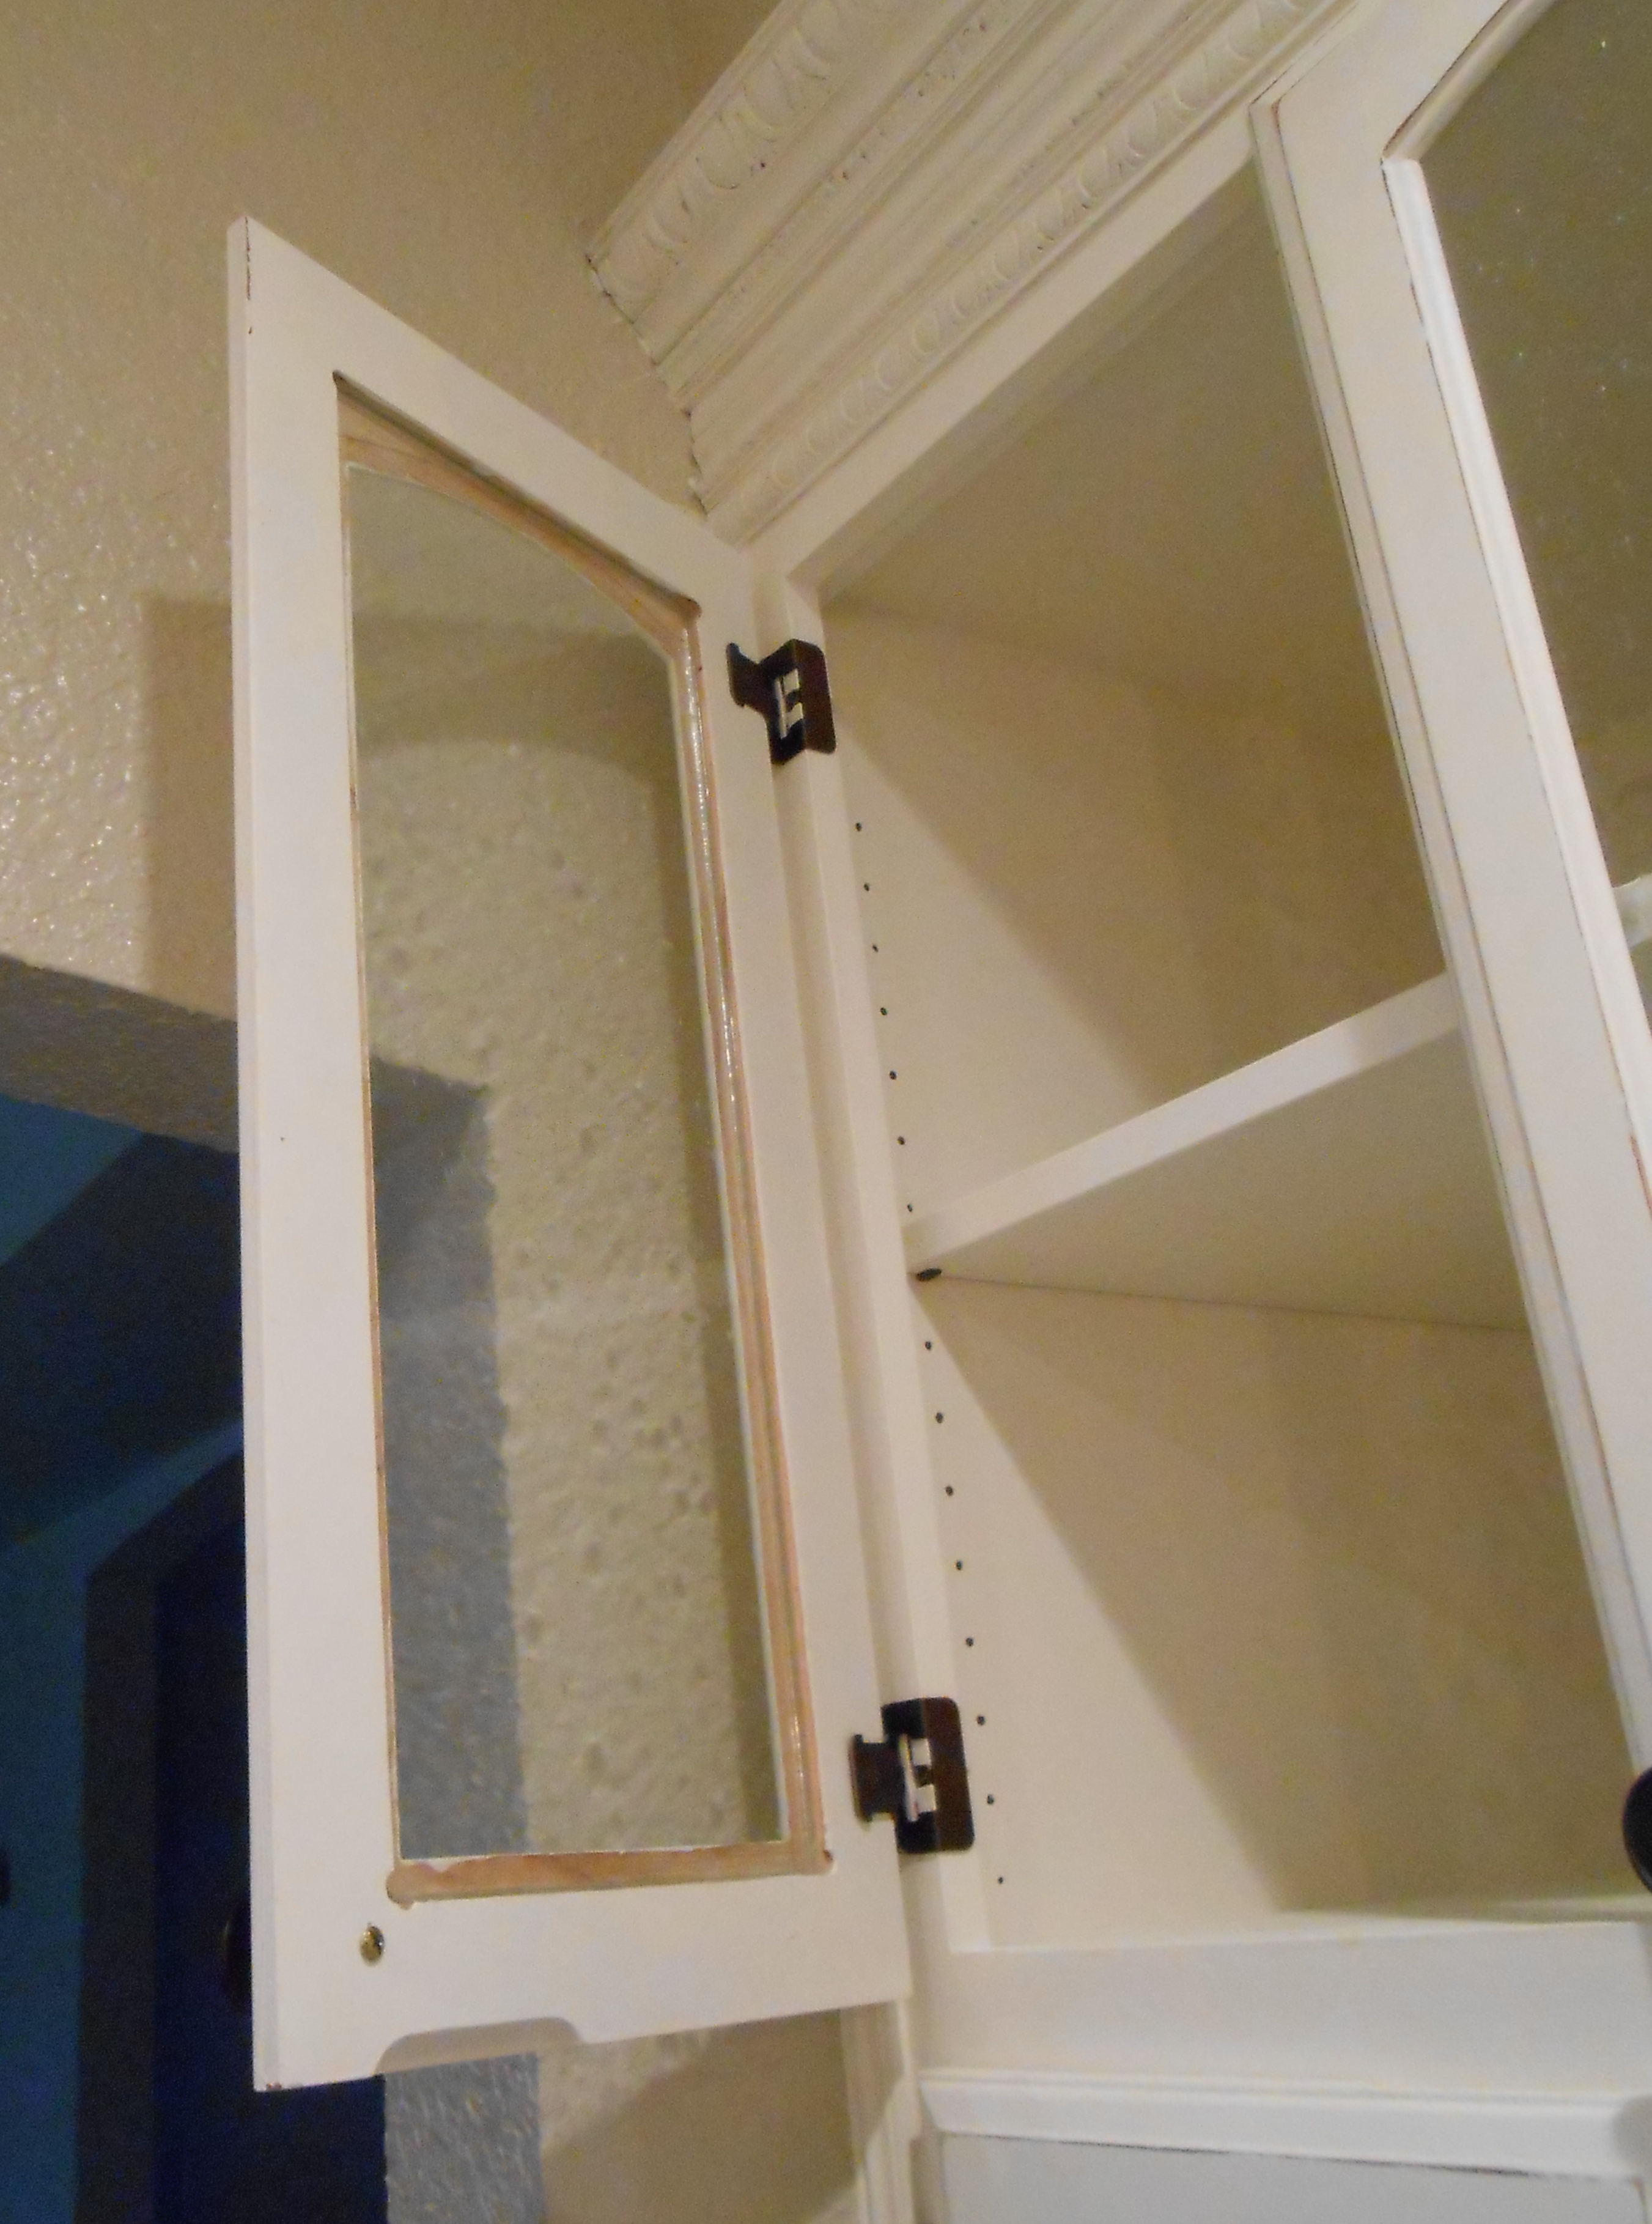 Diy Changing Solid Cabinet Doors To Glass Inserts Front Porch Cozy